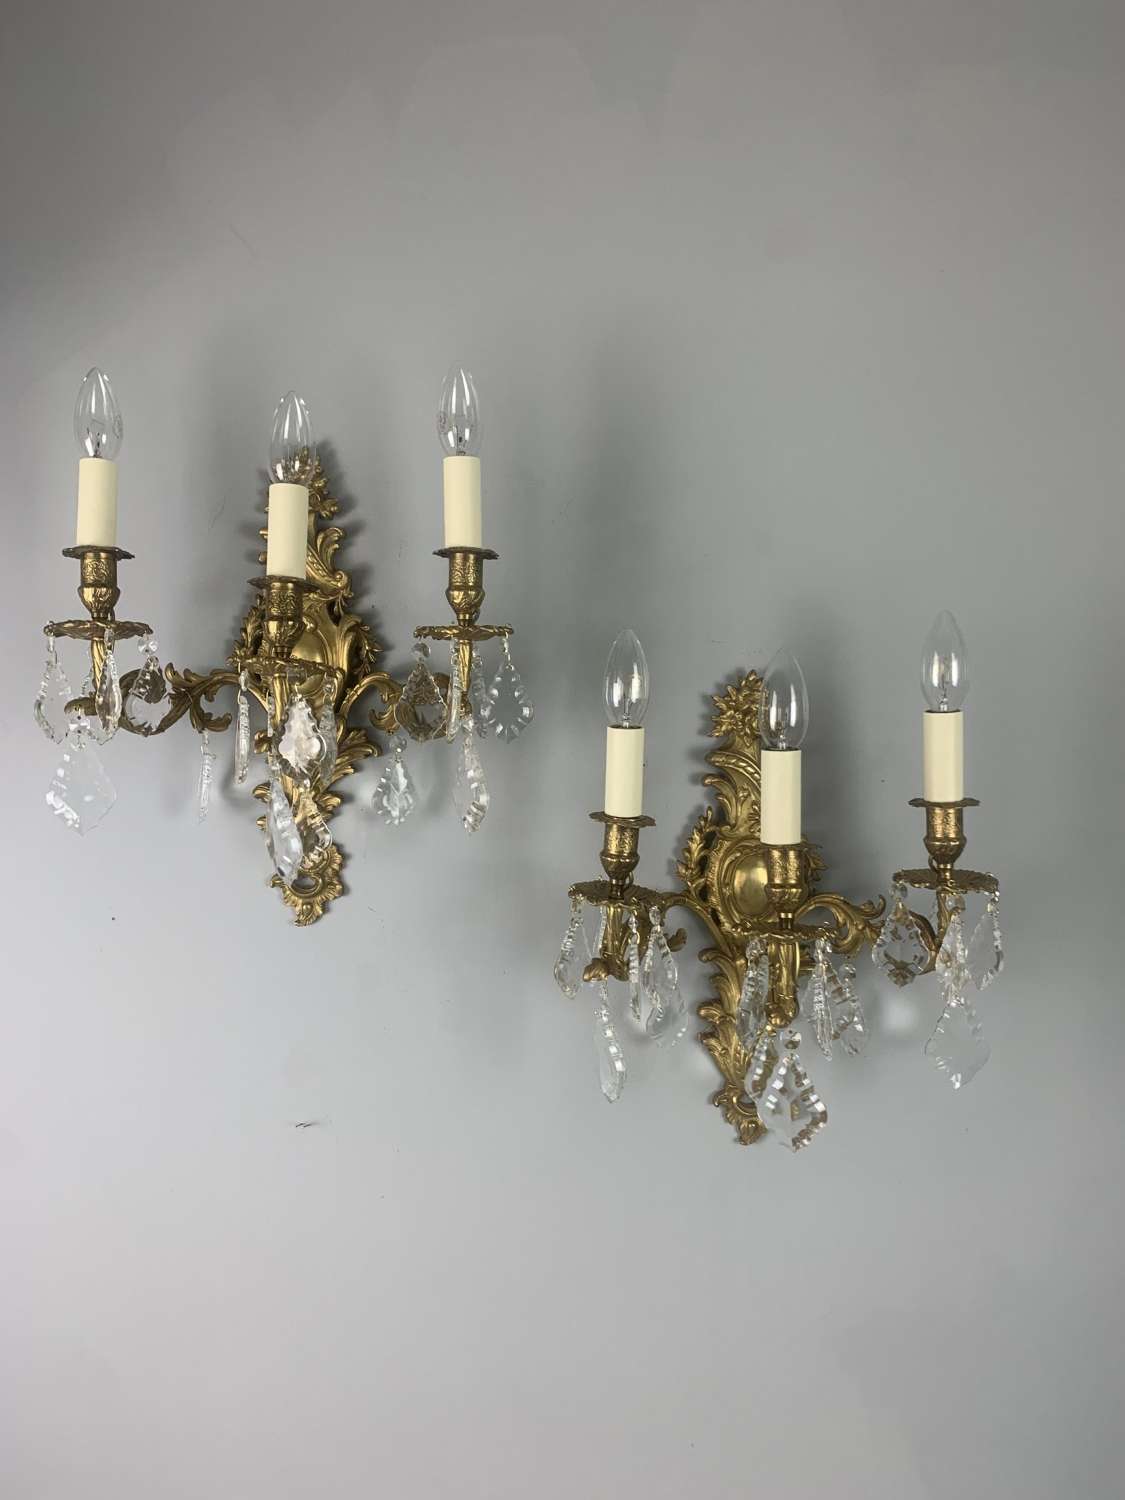 French Gilt Brass Triple Arm Antique Wall Lights With Glass Droppers